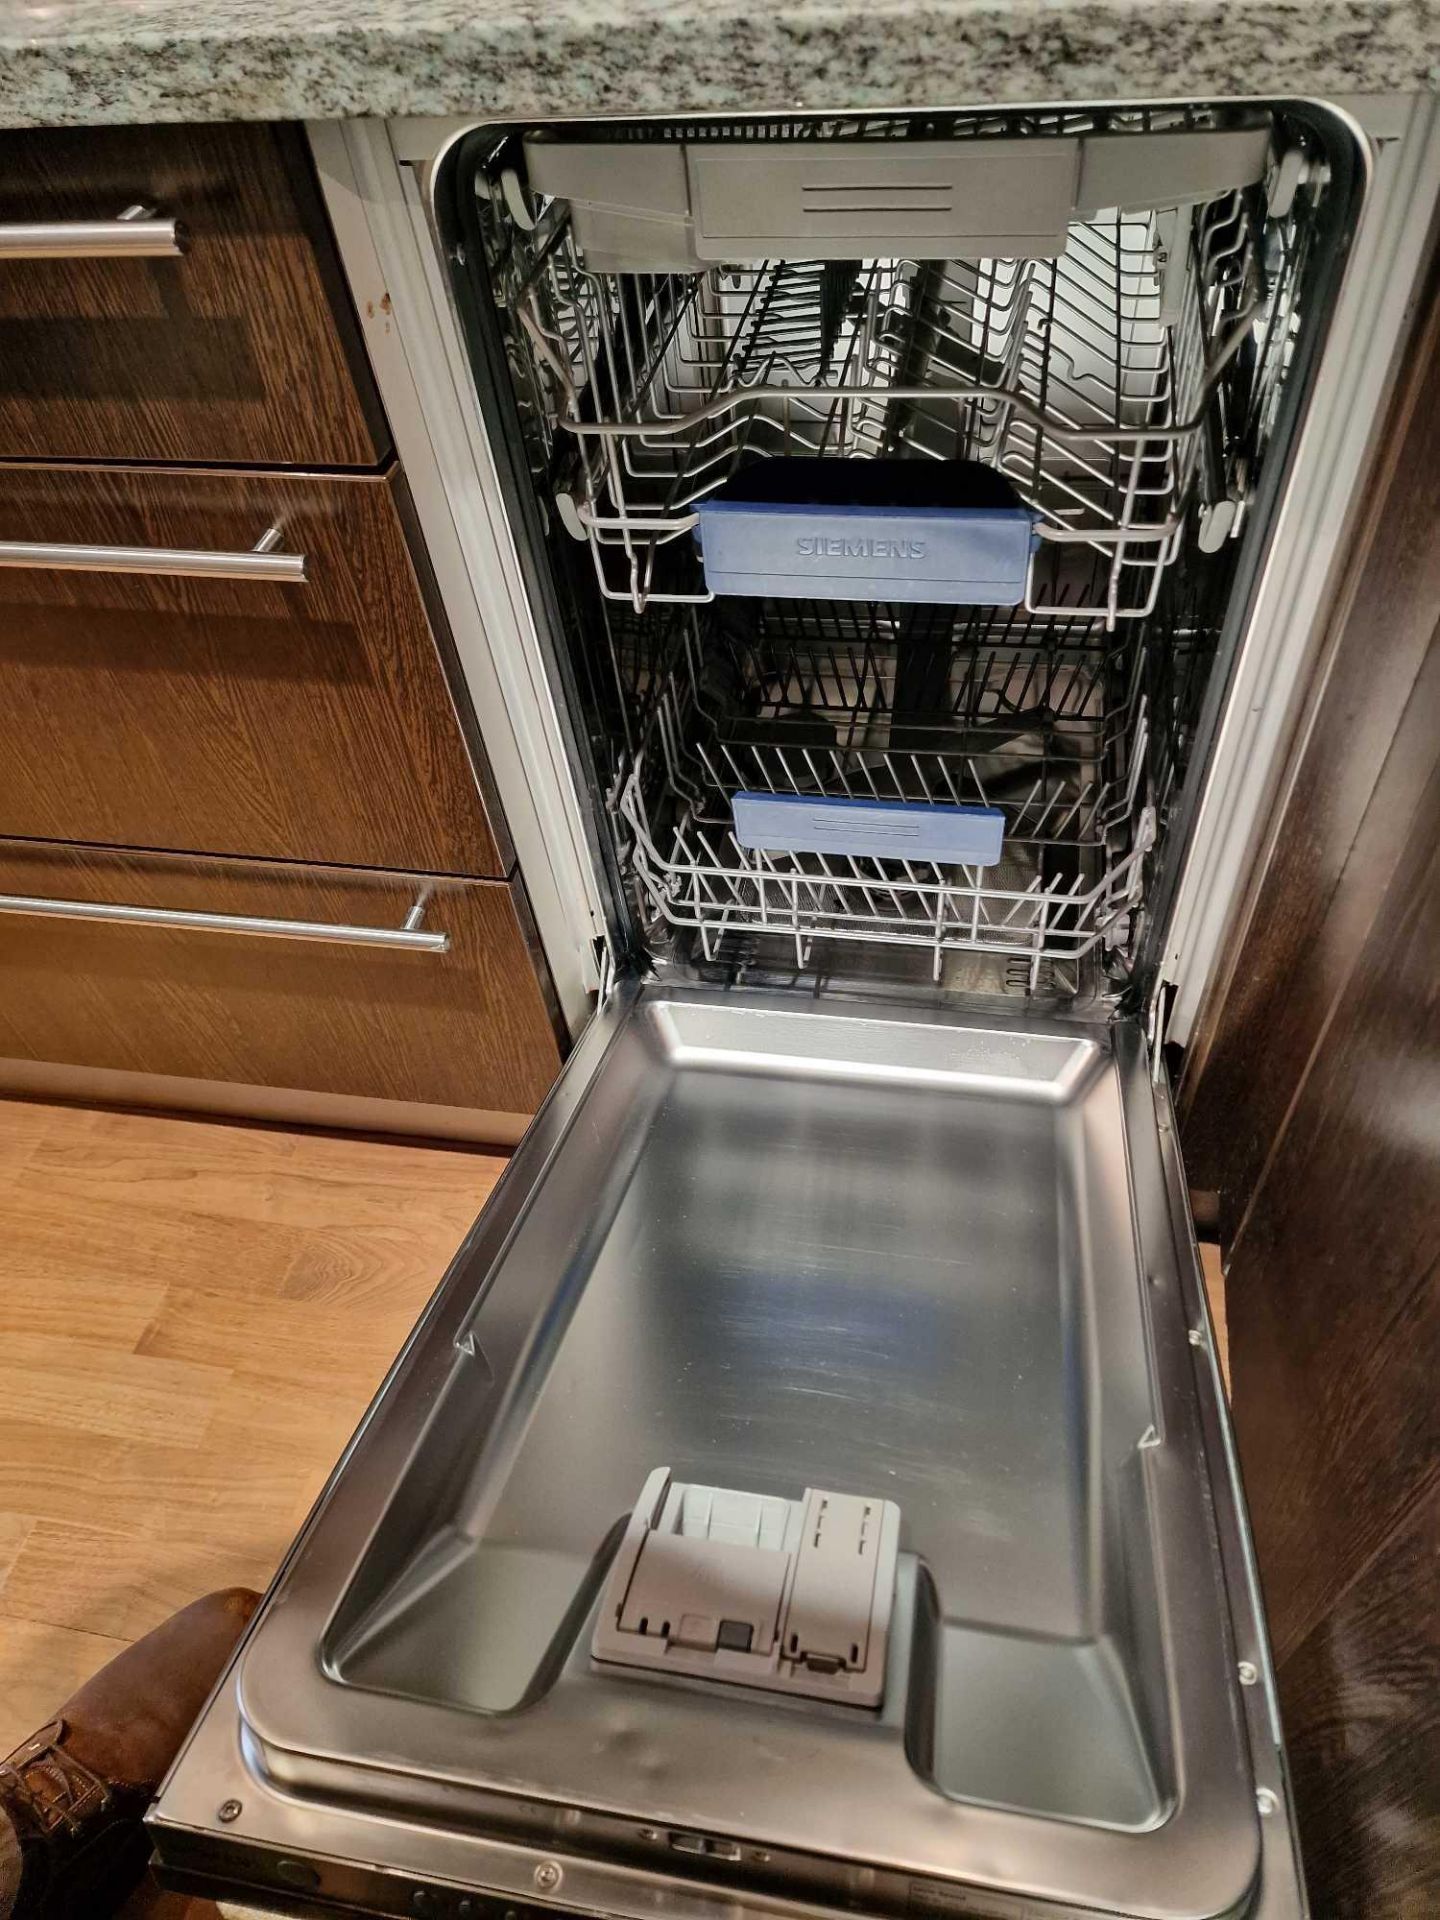 Siemens SD4P1S 10.0 Place settings integrated dishwasher 40 x 60 x 90cm (Room 2B) - Image 2 of 2